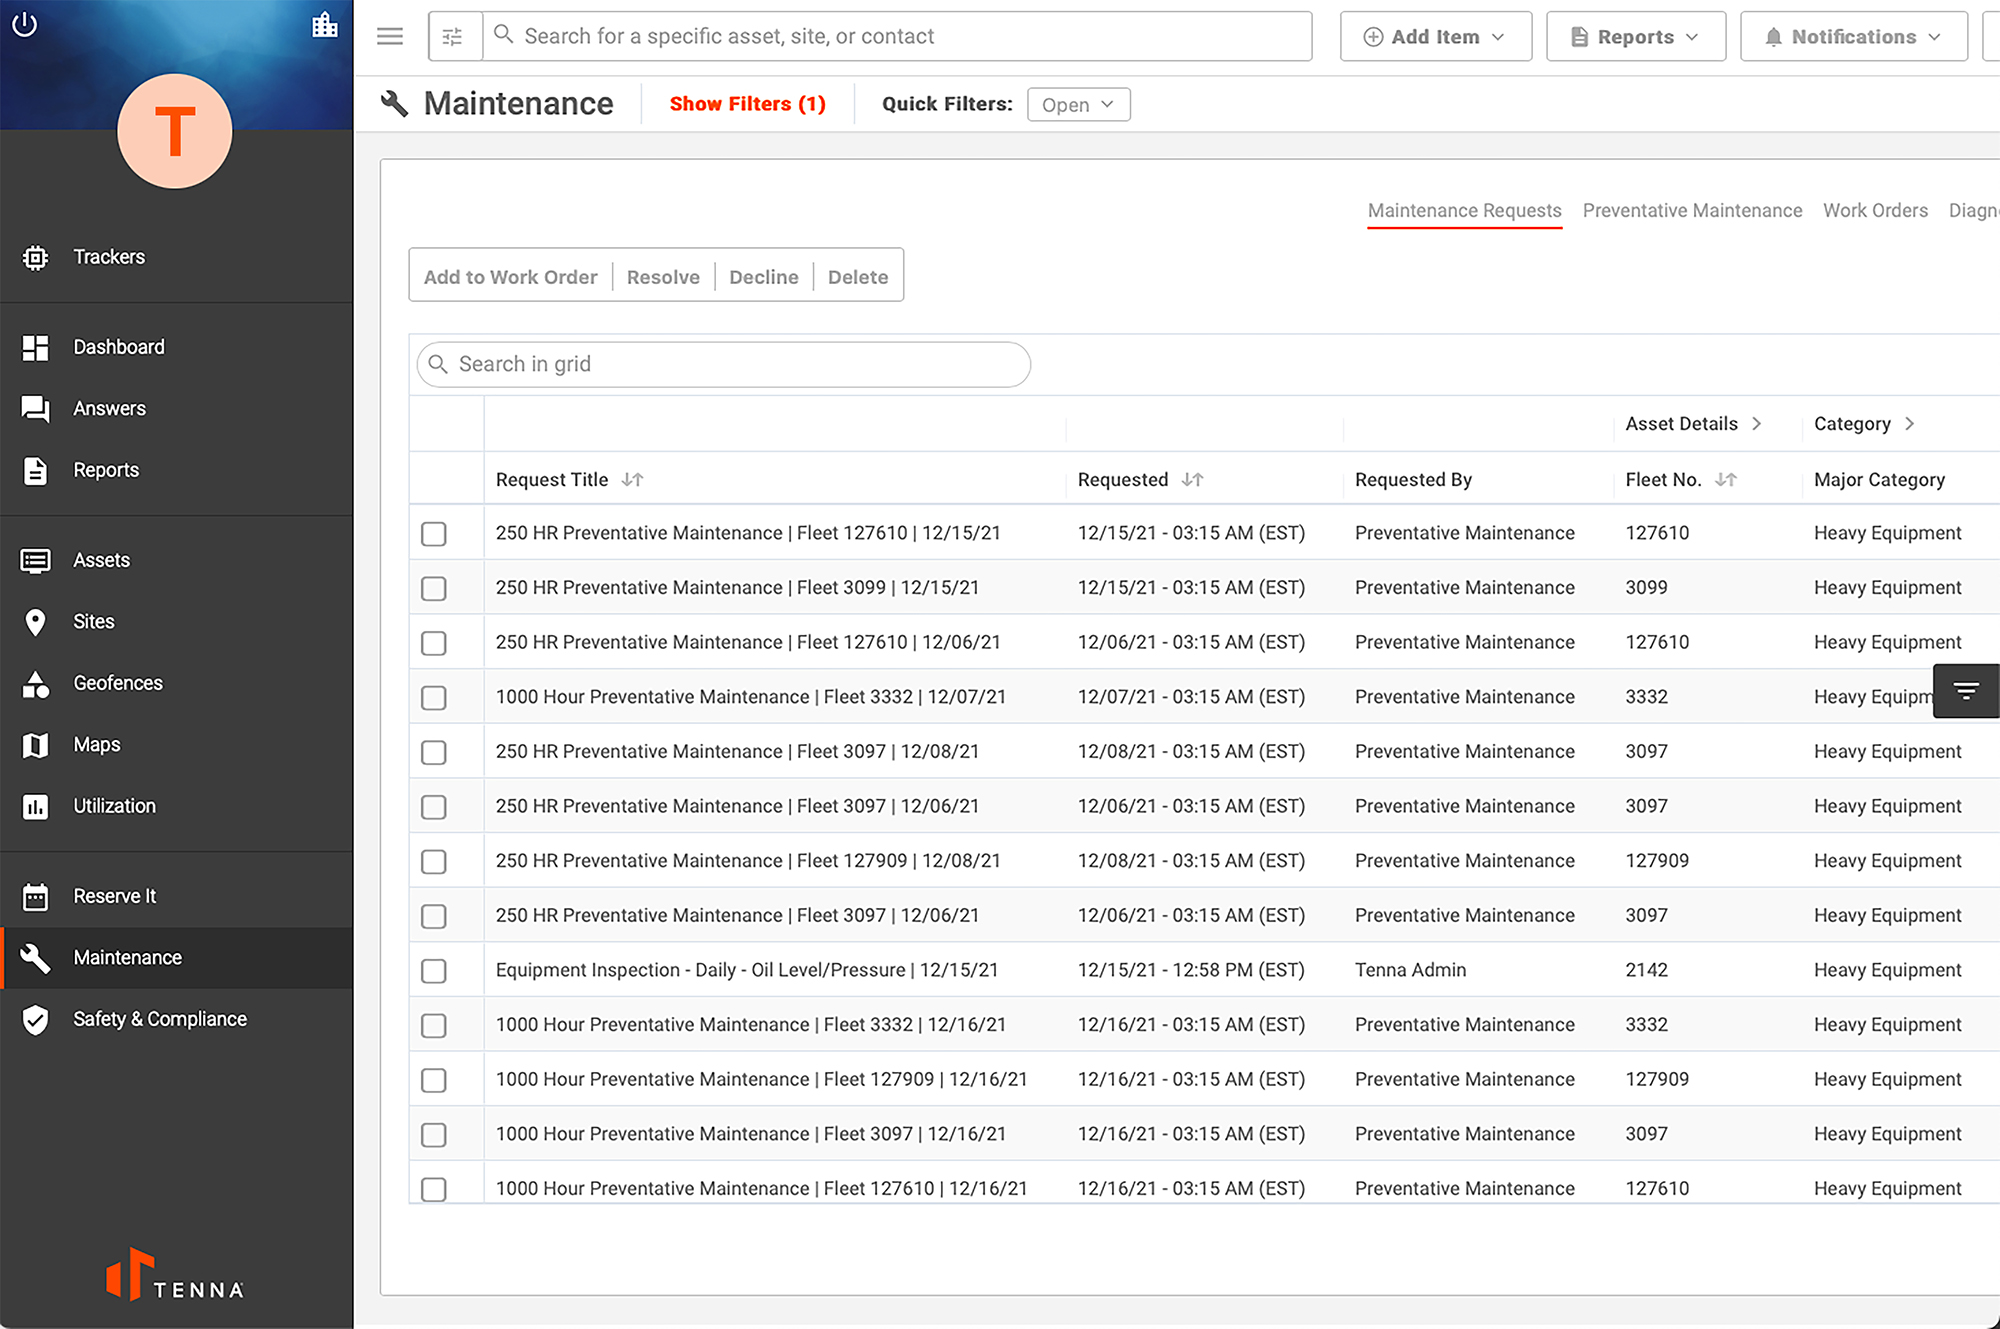 Tenna System showing the Maintenance Request Feature